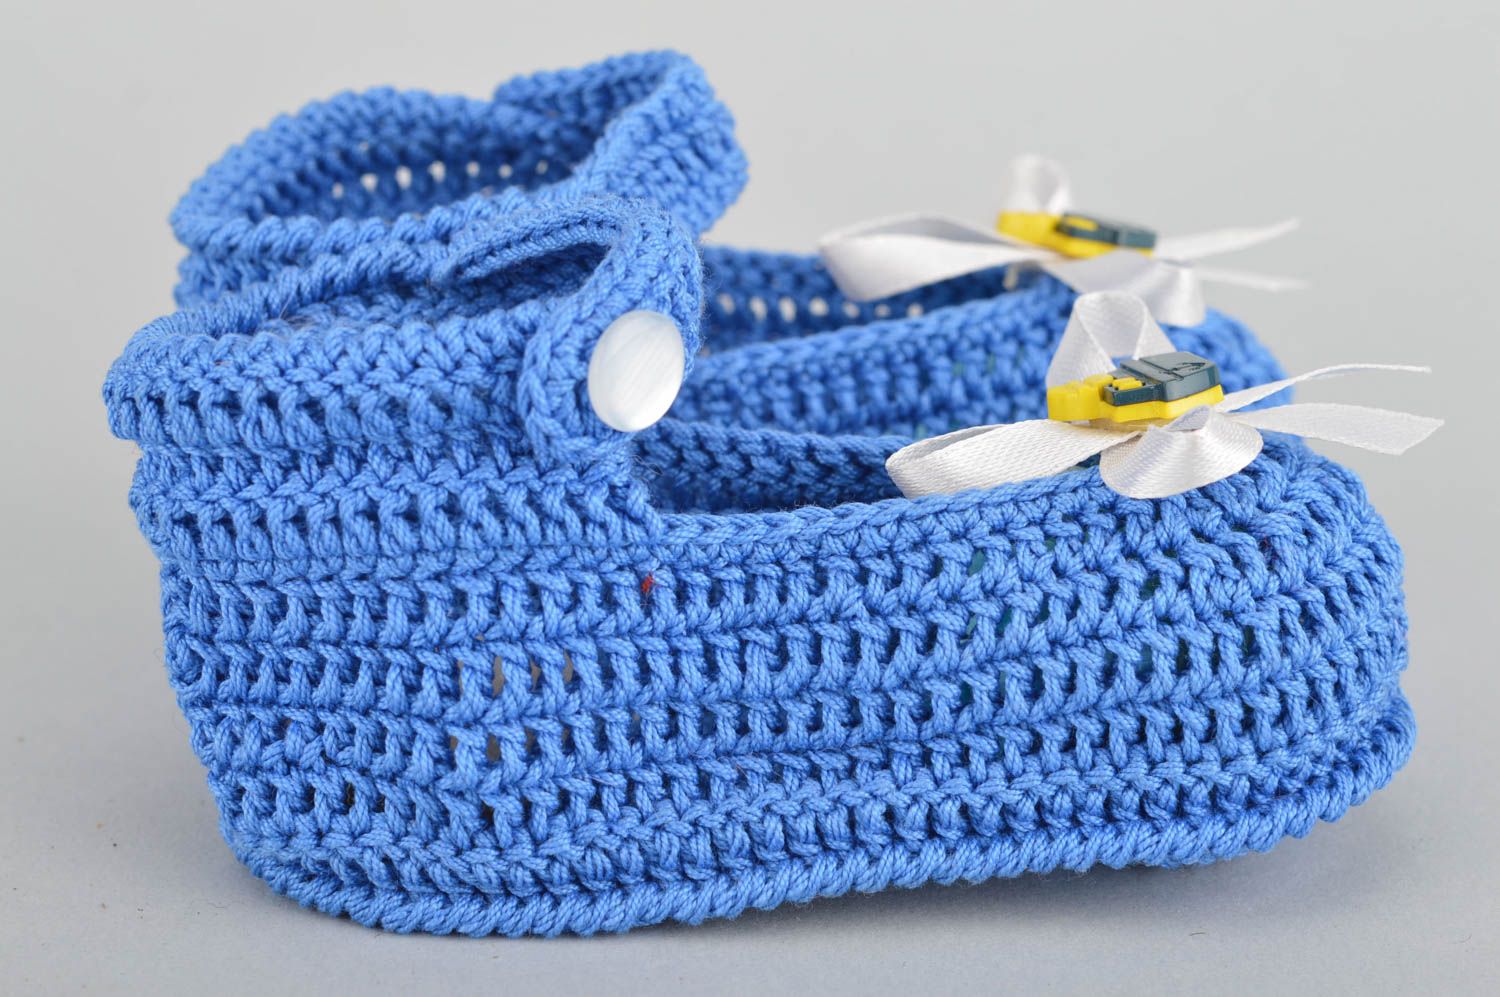 Handmade designer baby booties with blue ribbons and boats for baby boys photo 5